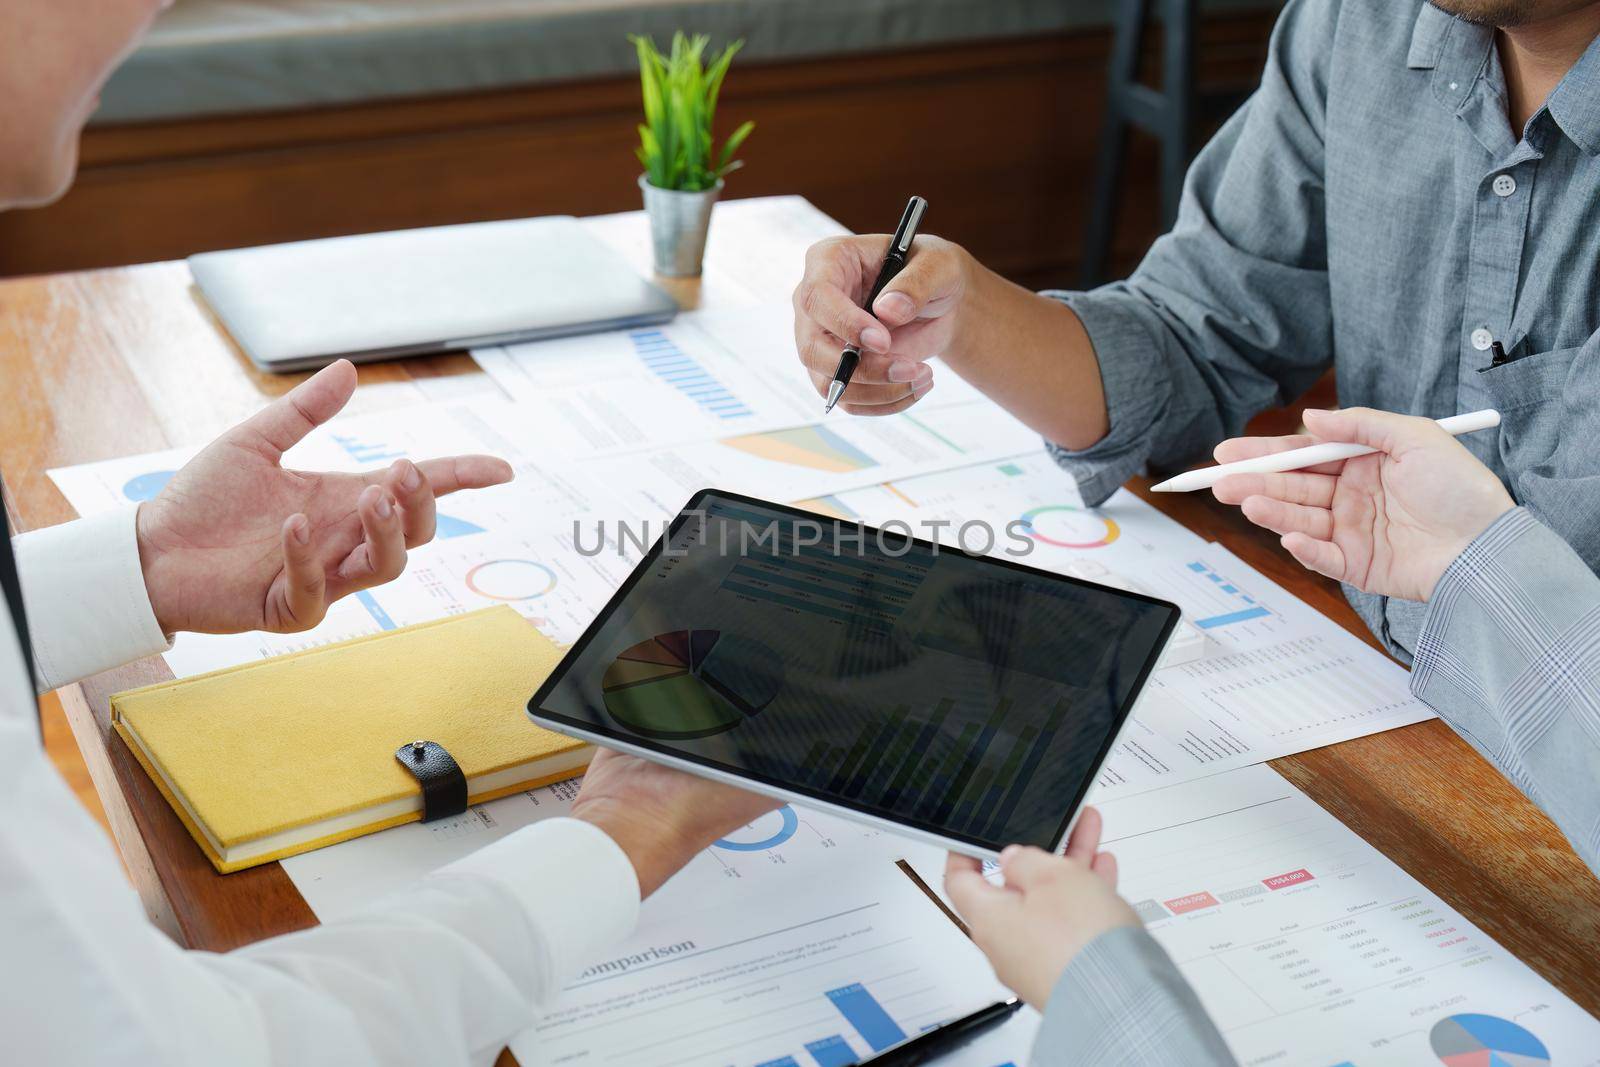 Planning to reduce investment risks, the image of a group of businesspeople working with partners is adjusting marketing strategies to analyze profitable and targeted customer needs at meetings..